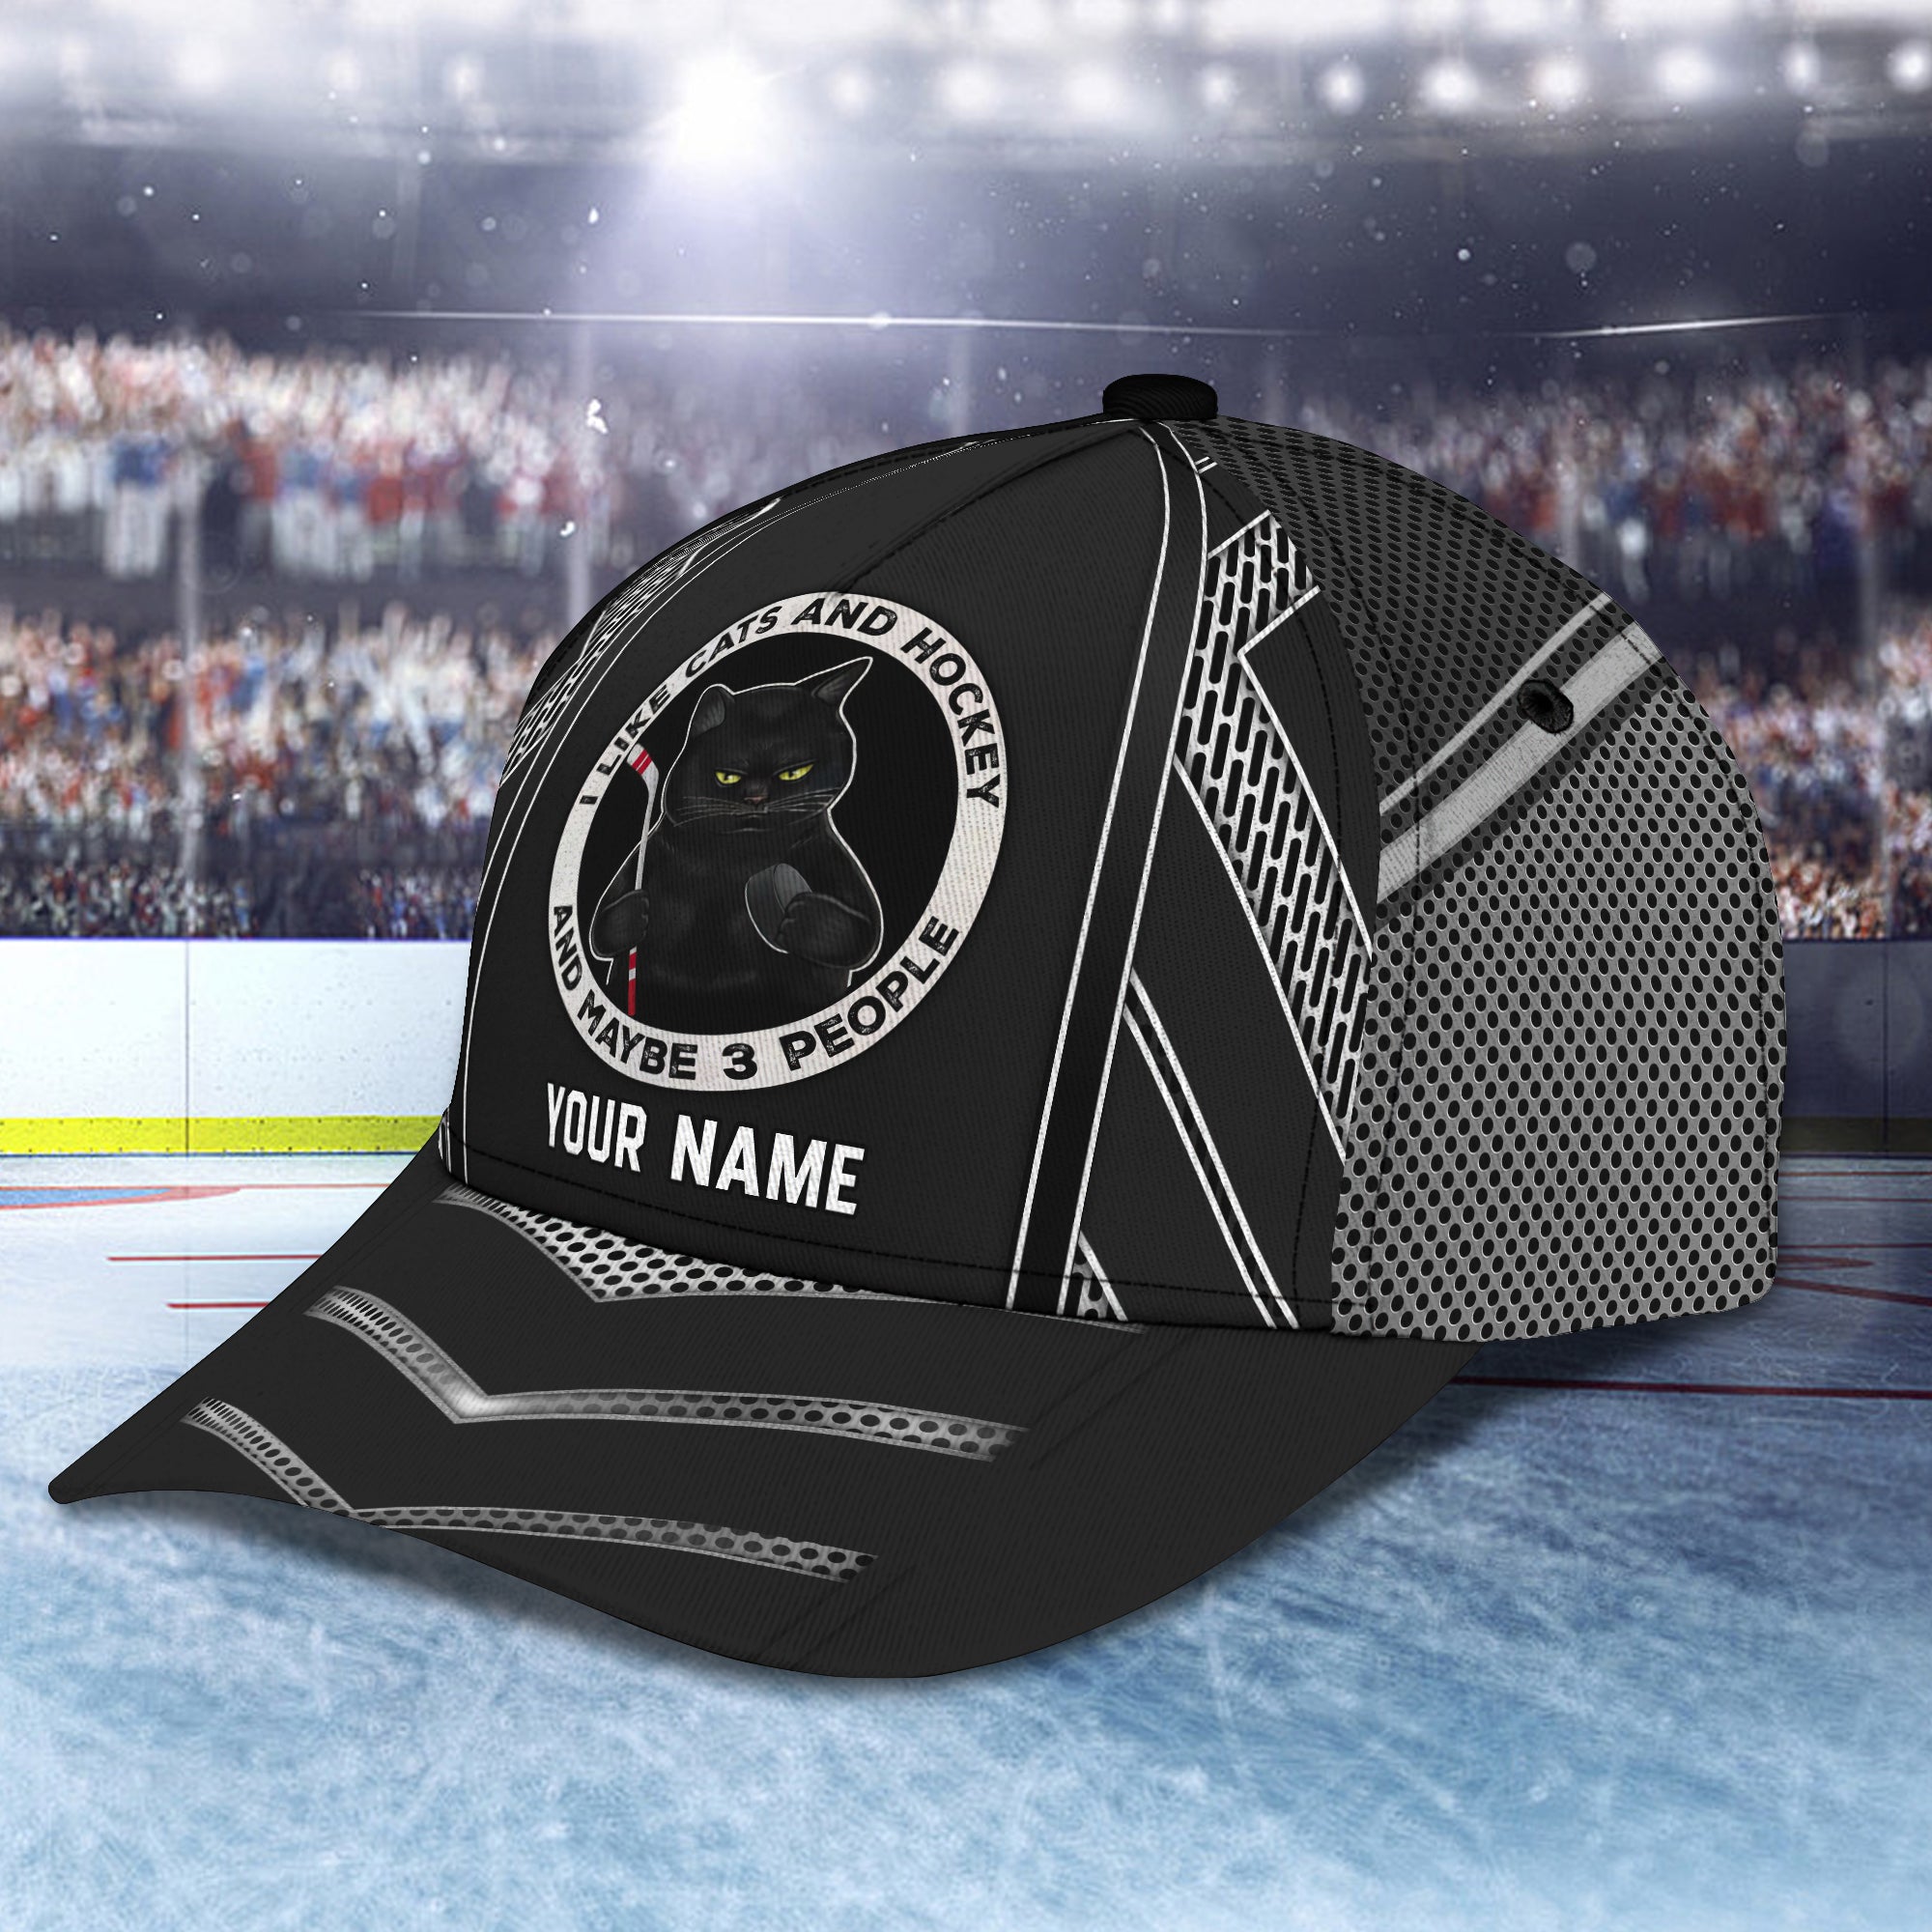 I Like Cat And Hockey- Personalized Name Cap - Loop- T2k-237